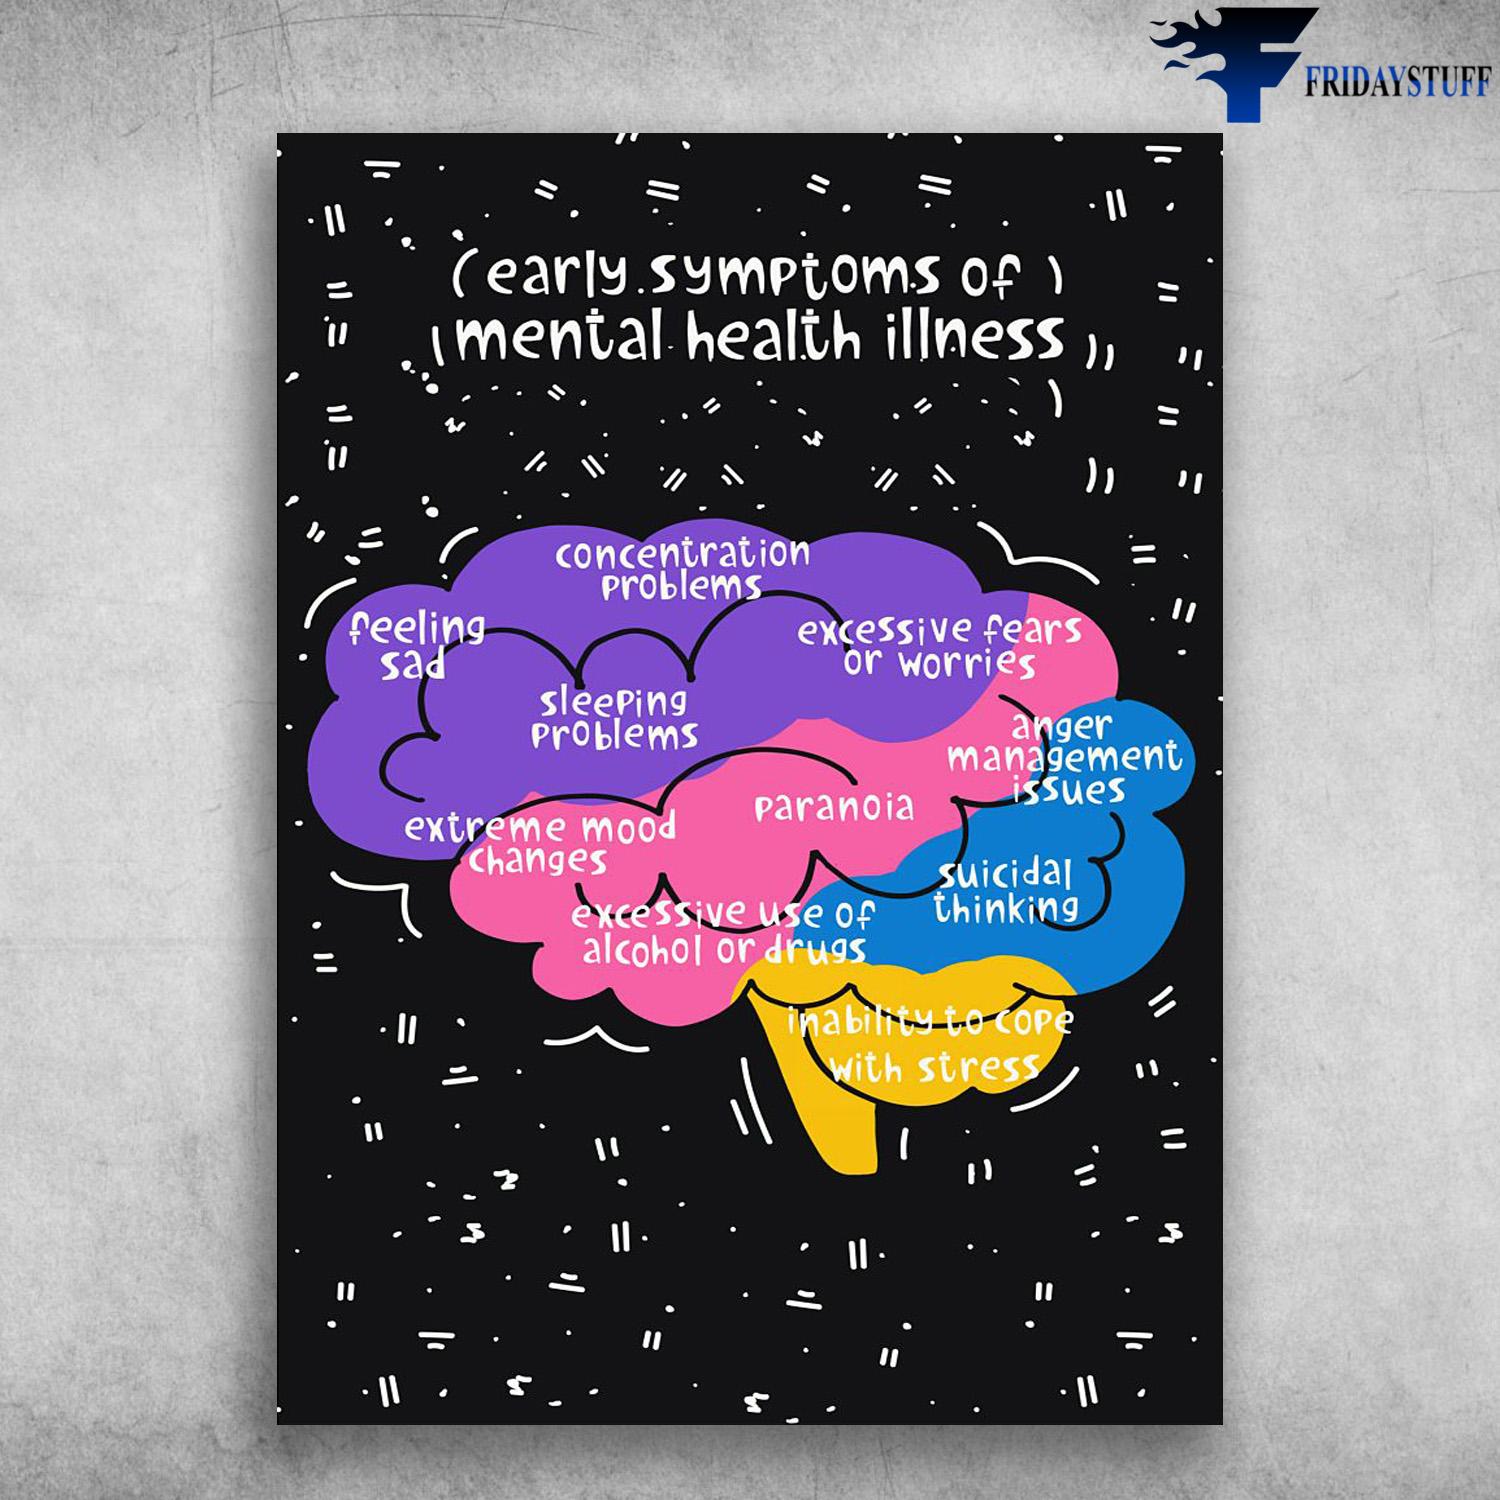 Brain Poster, Early Symptoms Of Mental Health Illness, Feeling Sad, Sleeping Problems, Concentration Problem, Excessive Fears Or Worries